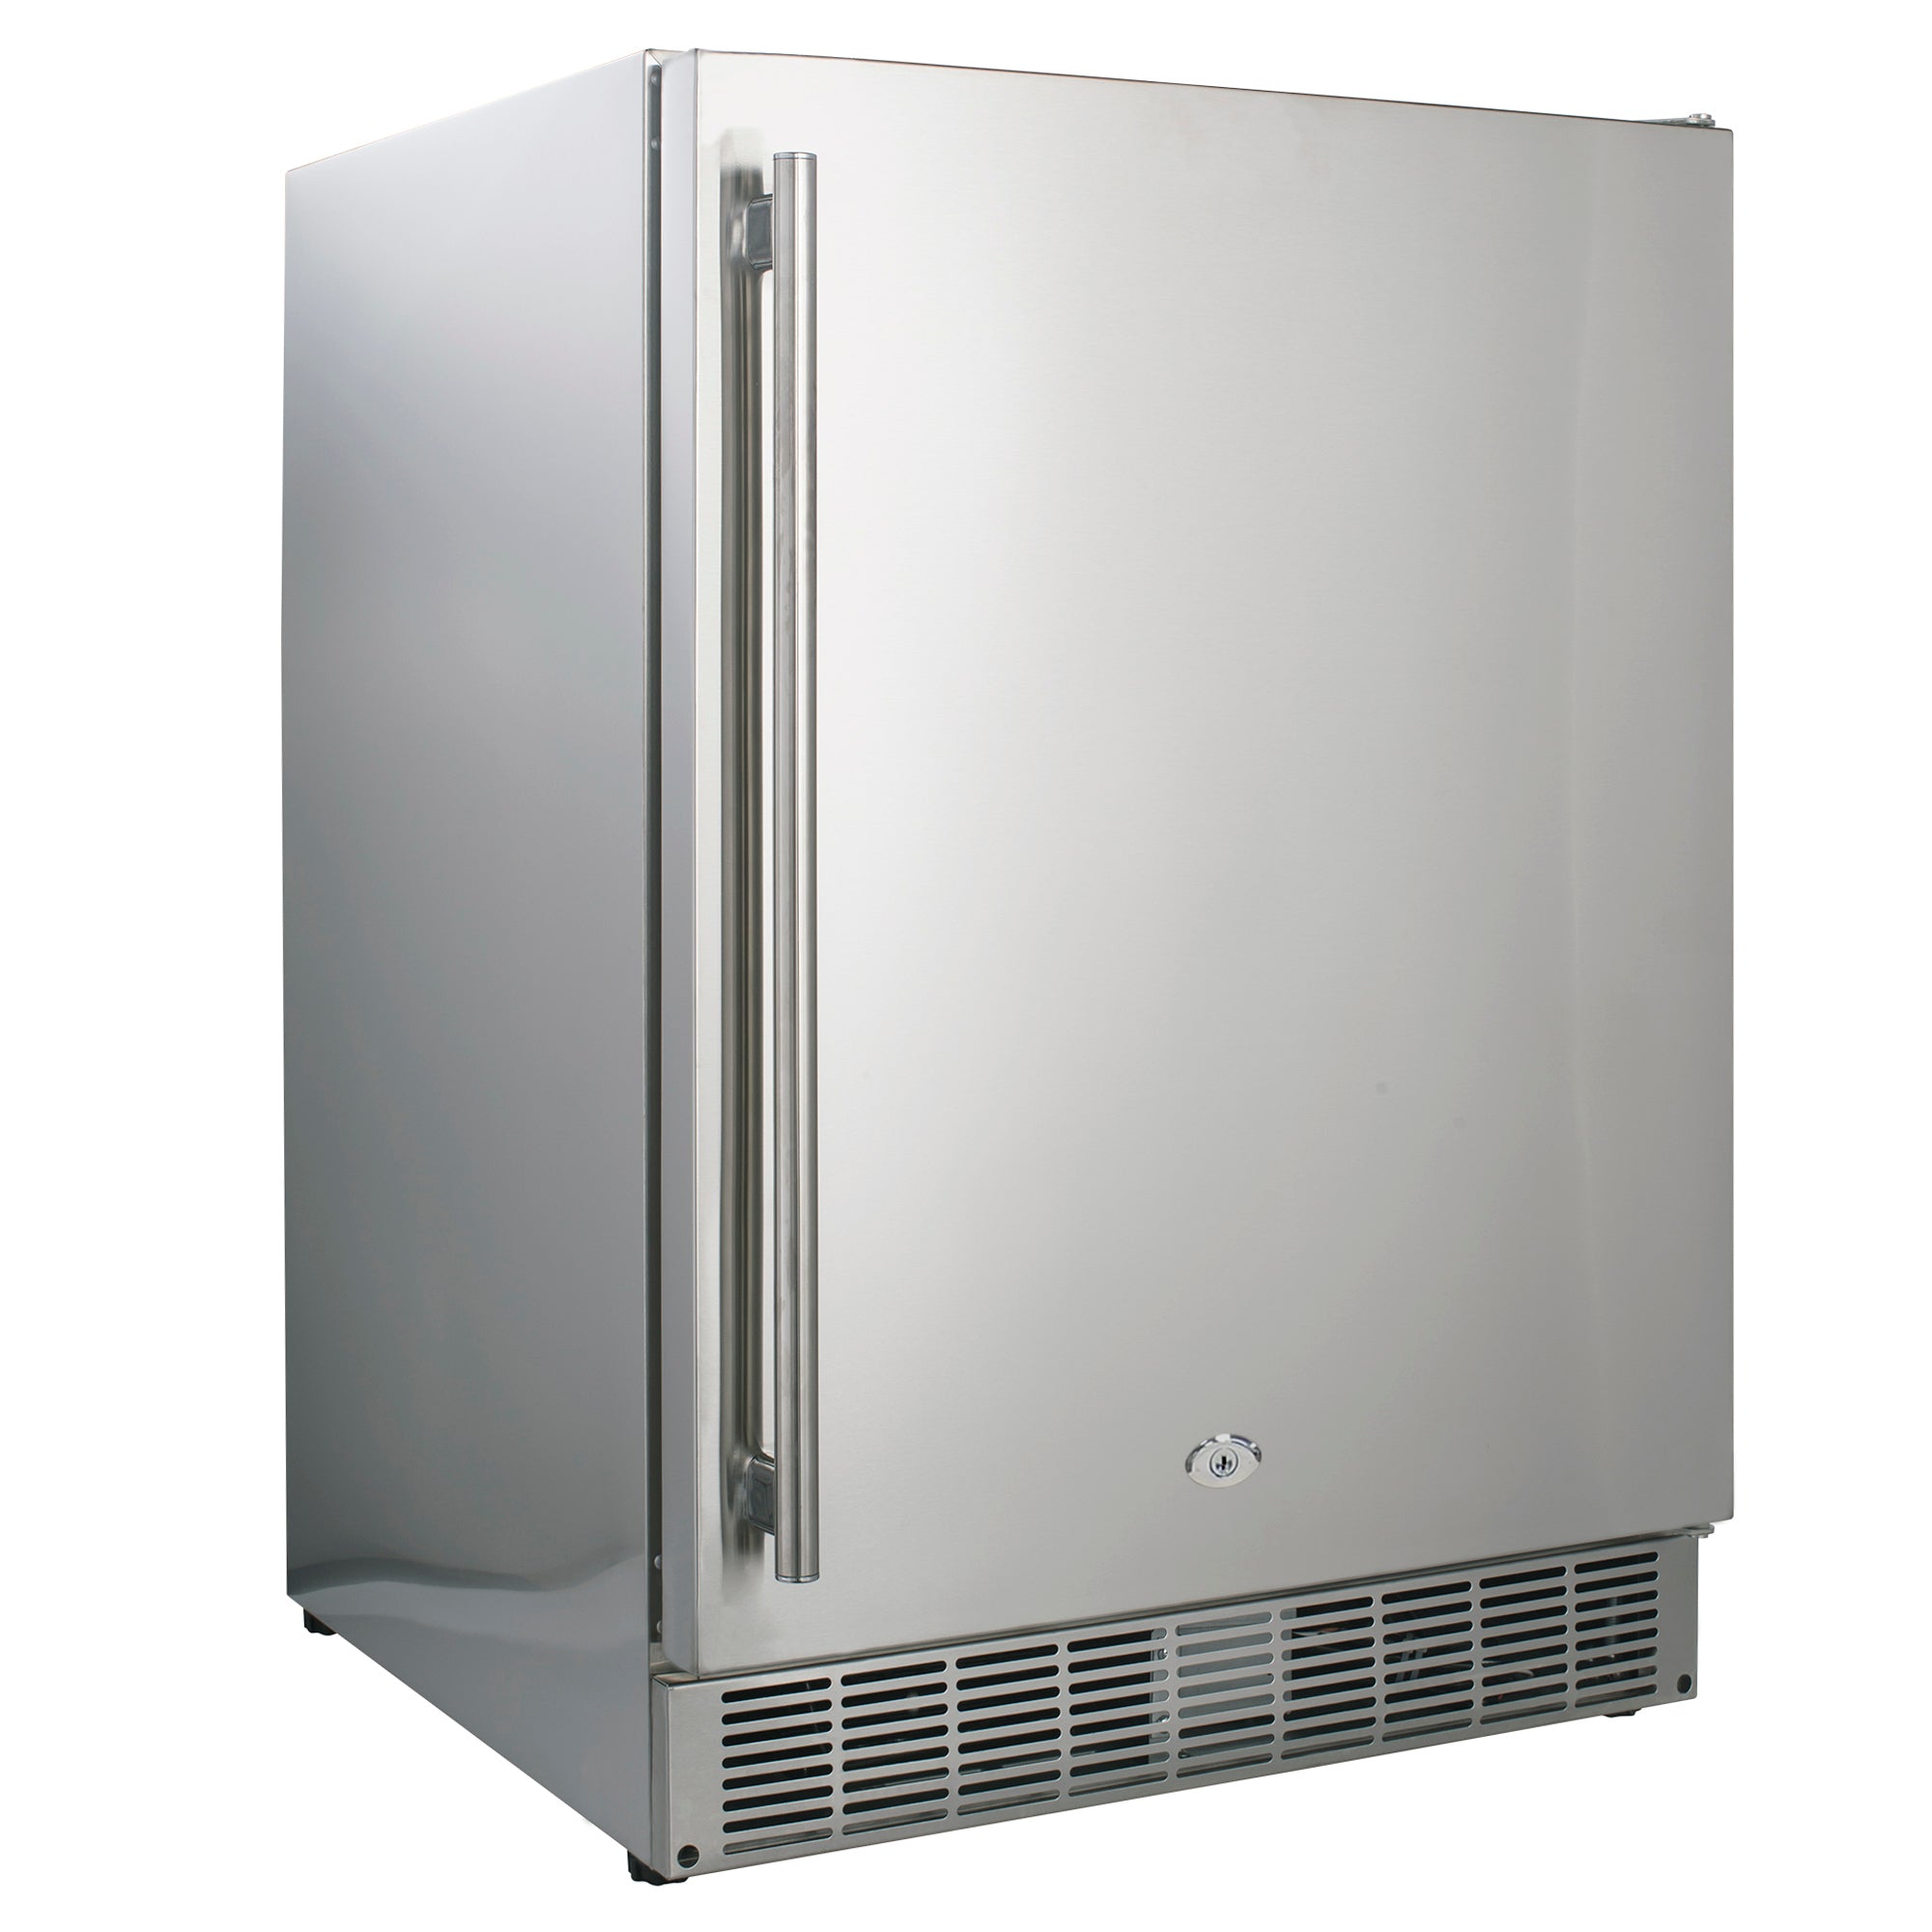 Maxx Ice - MCR5U-O, Maxx Ice Compact Outdoor Refrigerator, 23.6"W, 5.2 cu. ft. Capacity, in Stainless Steel